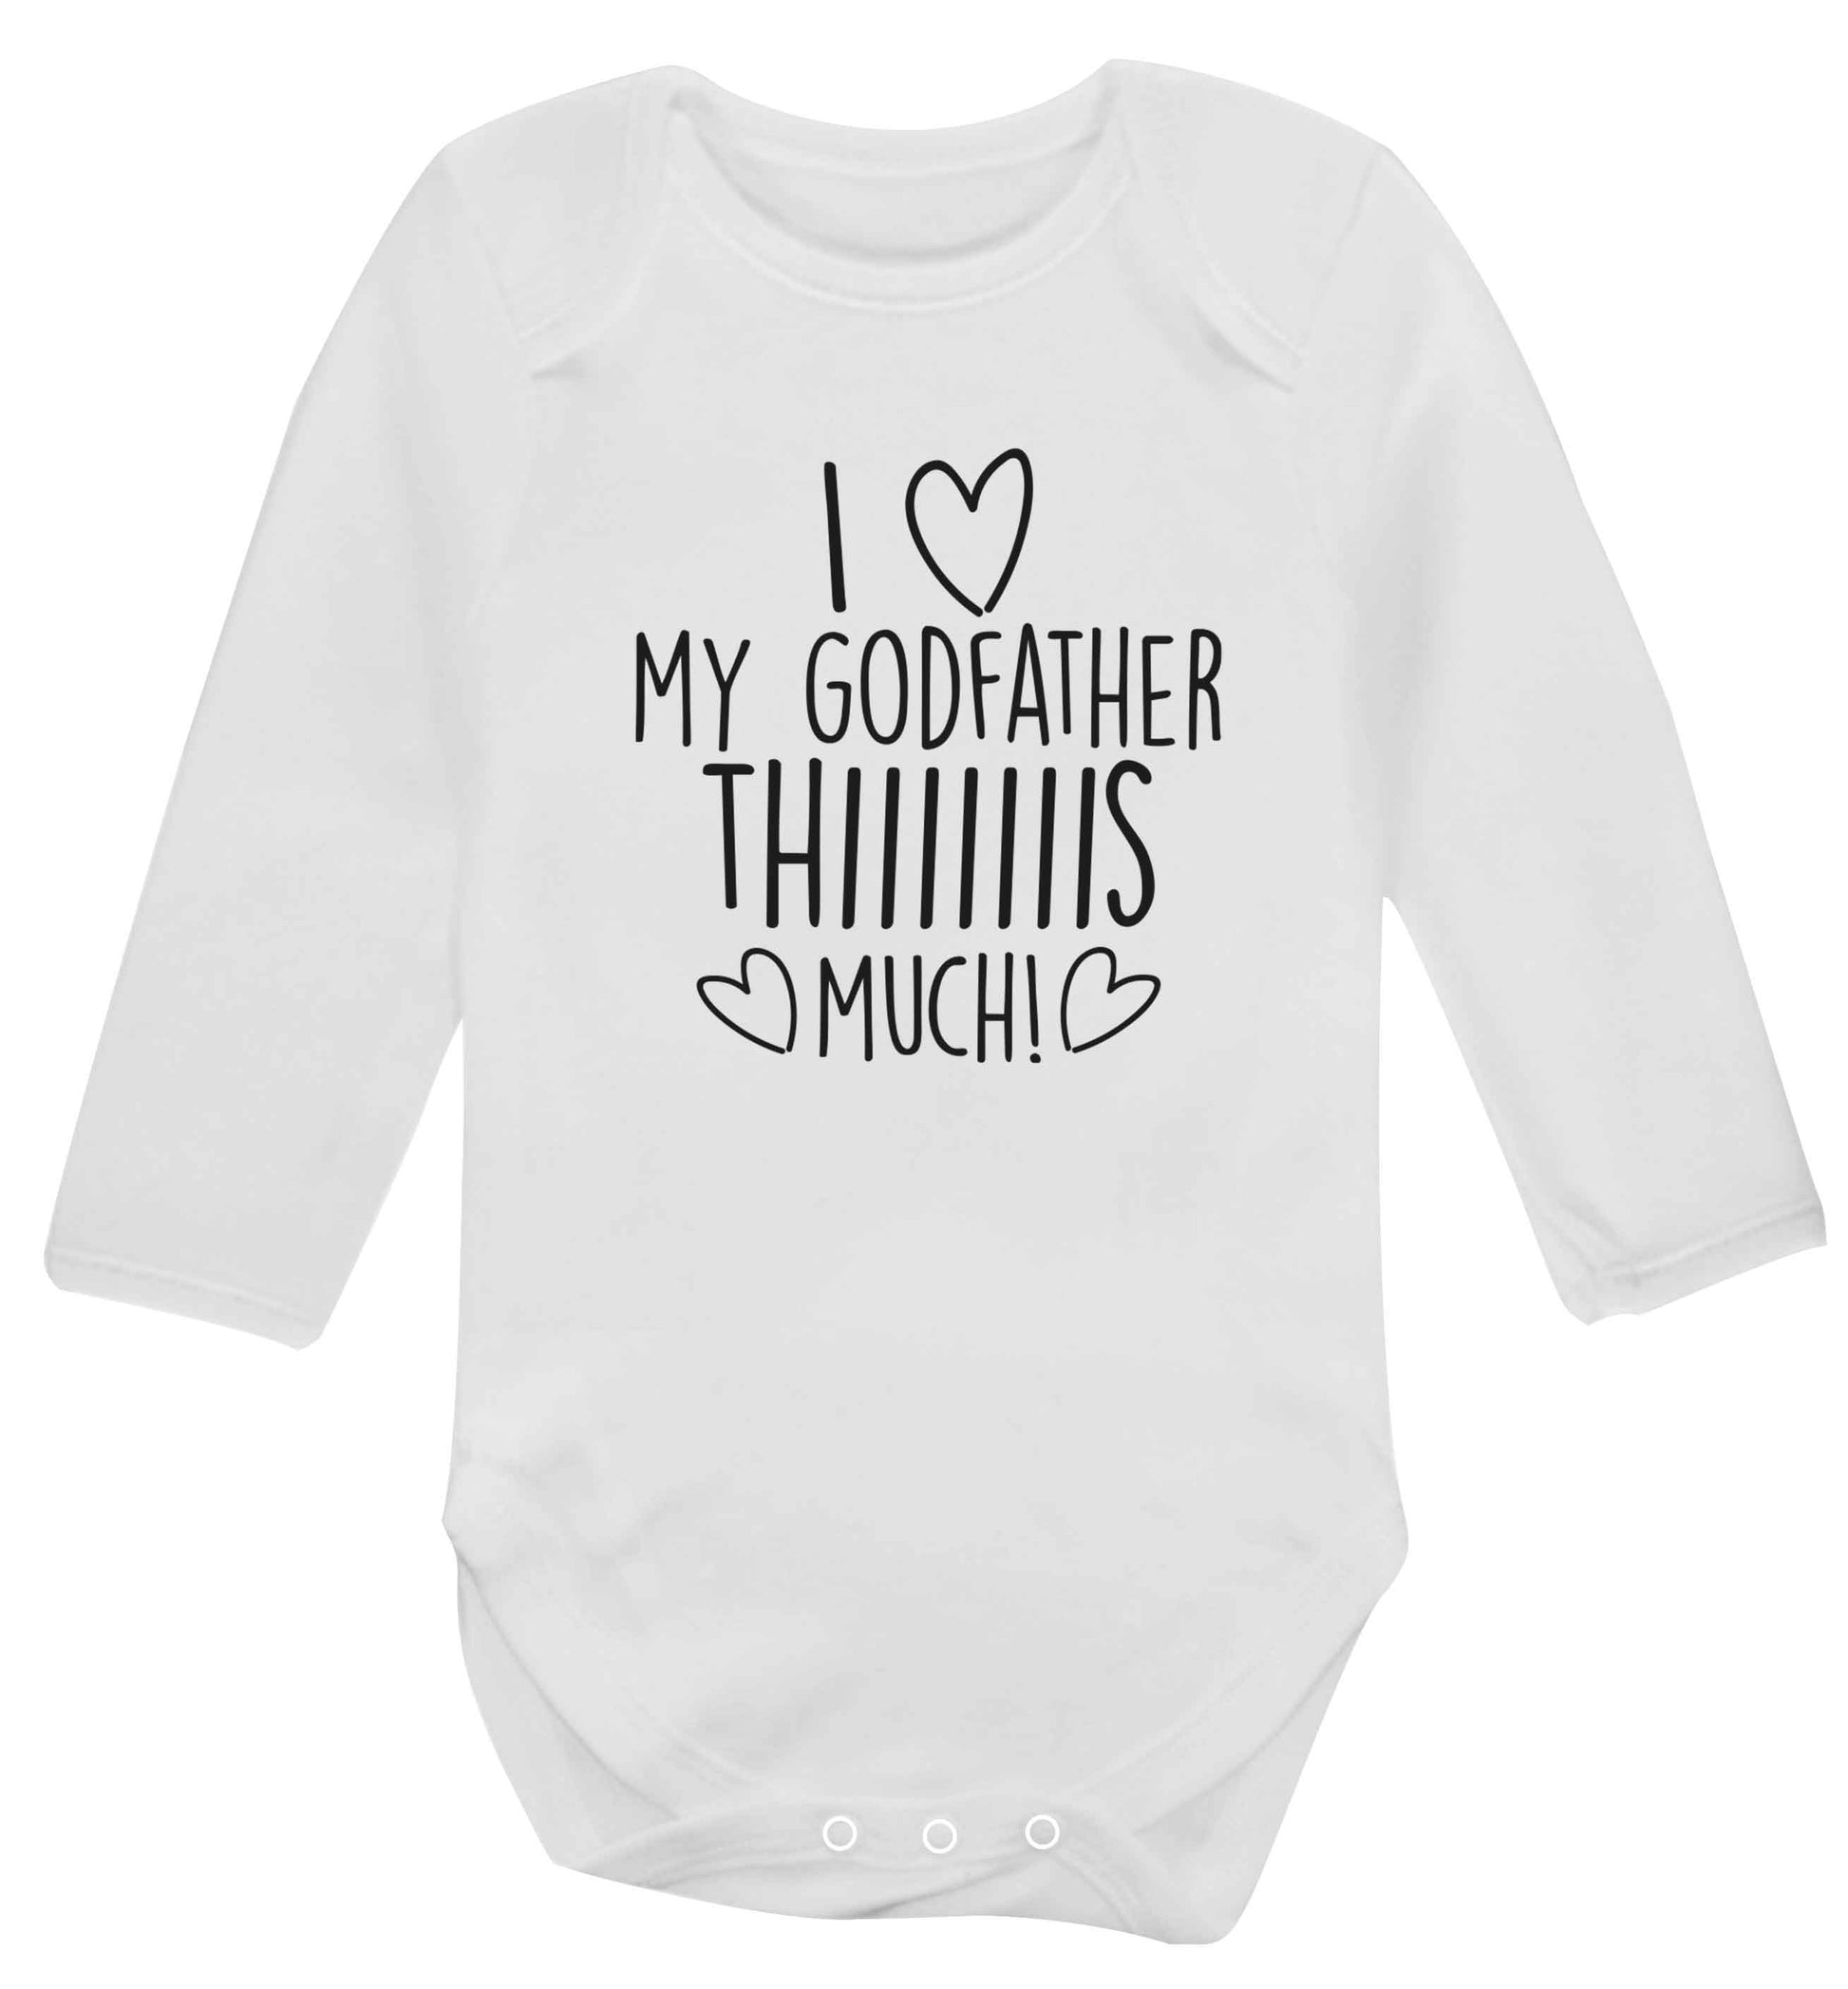 I love my Godfather this much baby vest long sleeved white 6-12 months